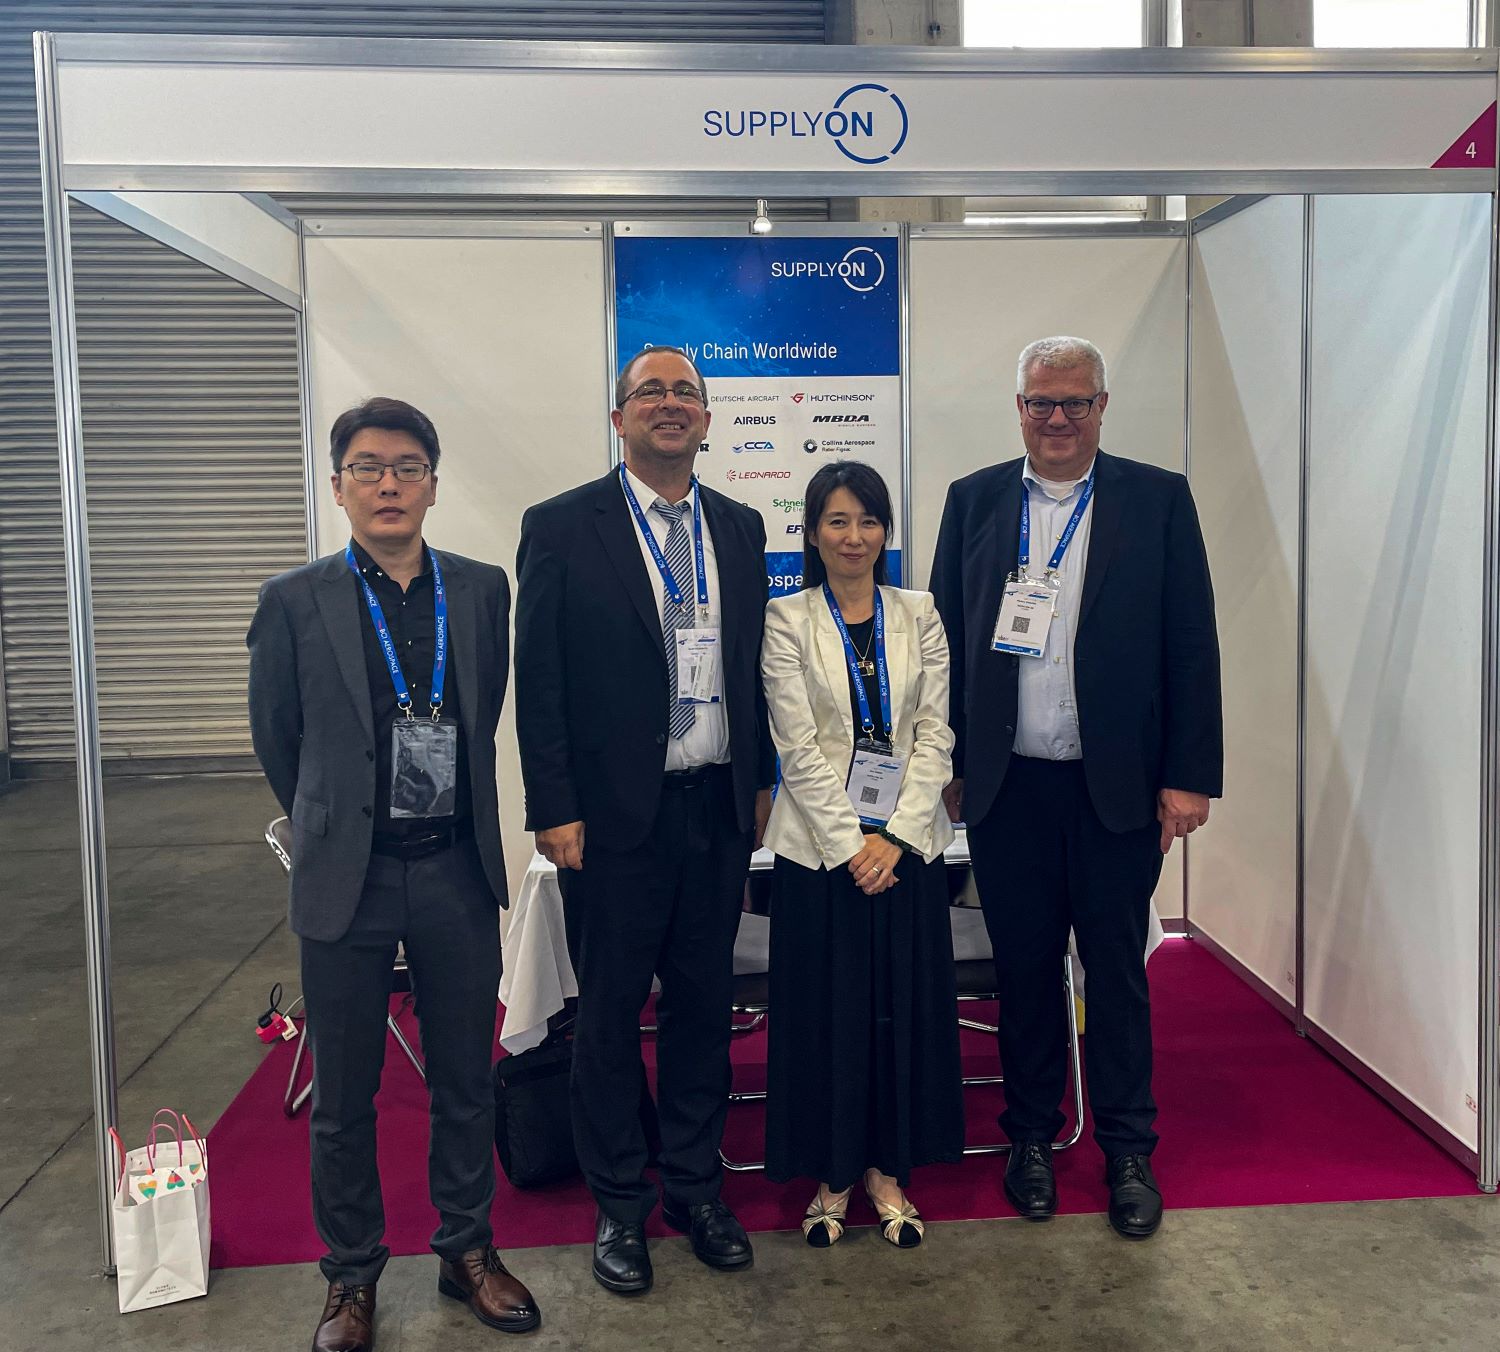 SupplyOn booth. From left to right: JIN RI, Arvid Holzwarth, Zixi Zheng, Markus Quicken